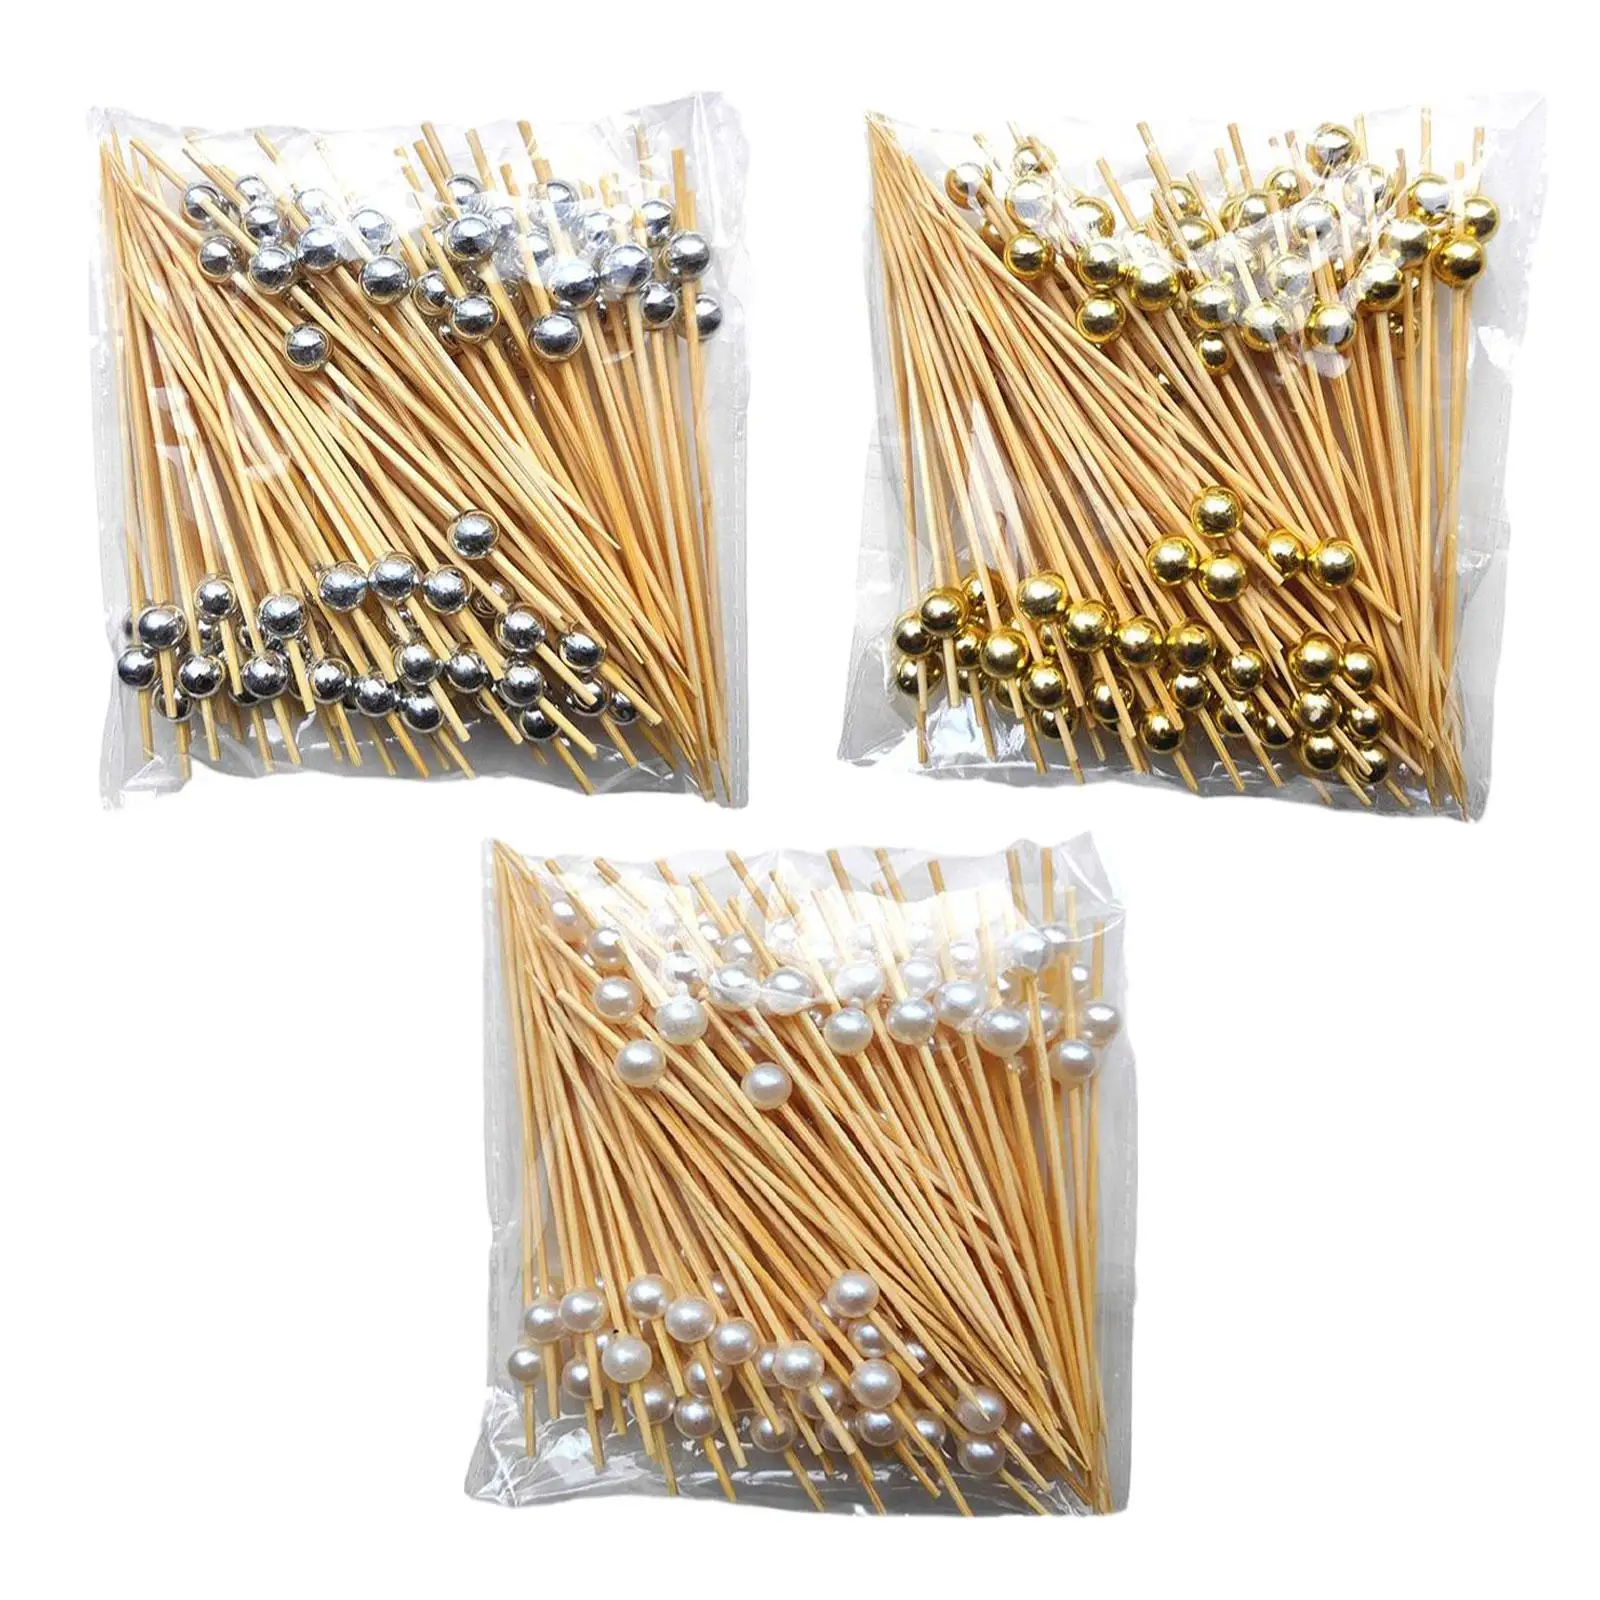 300Pcs Cocktail Sticks Disposable Food Fruit Forks Food Picks Bamboo Skewers for Appetizer Wedding Party Supplies Pastry Holiday